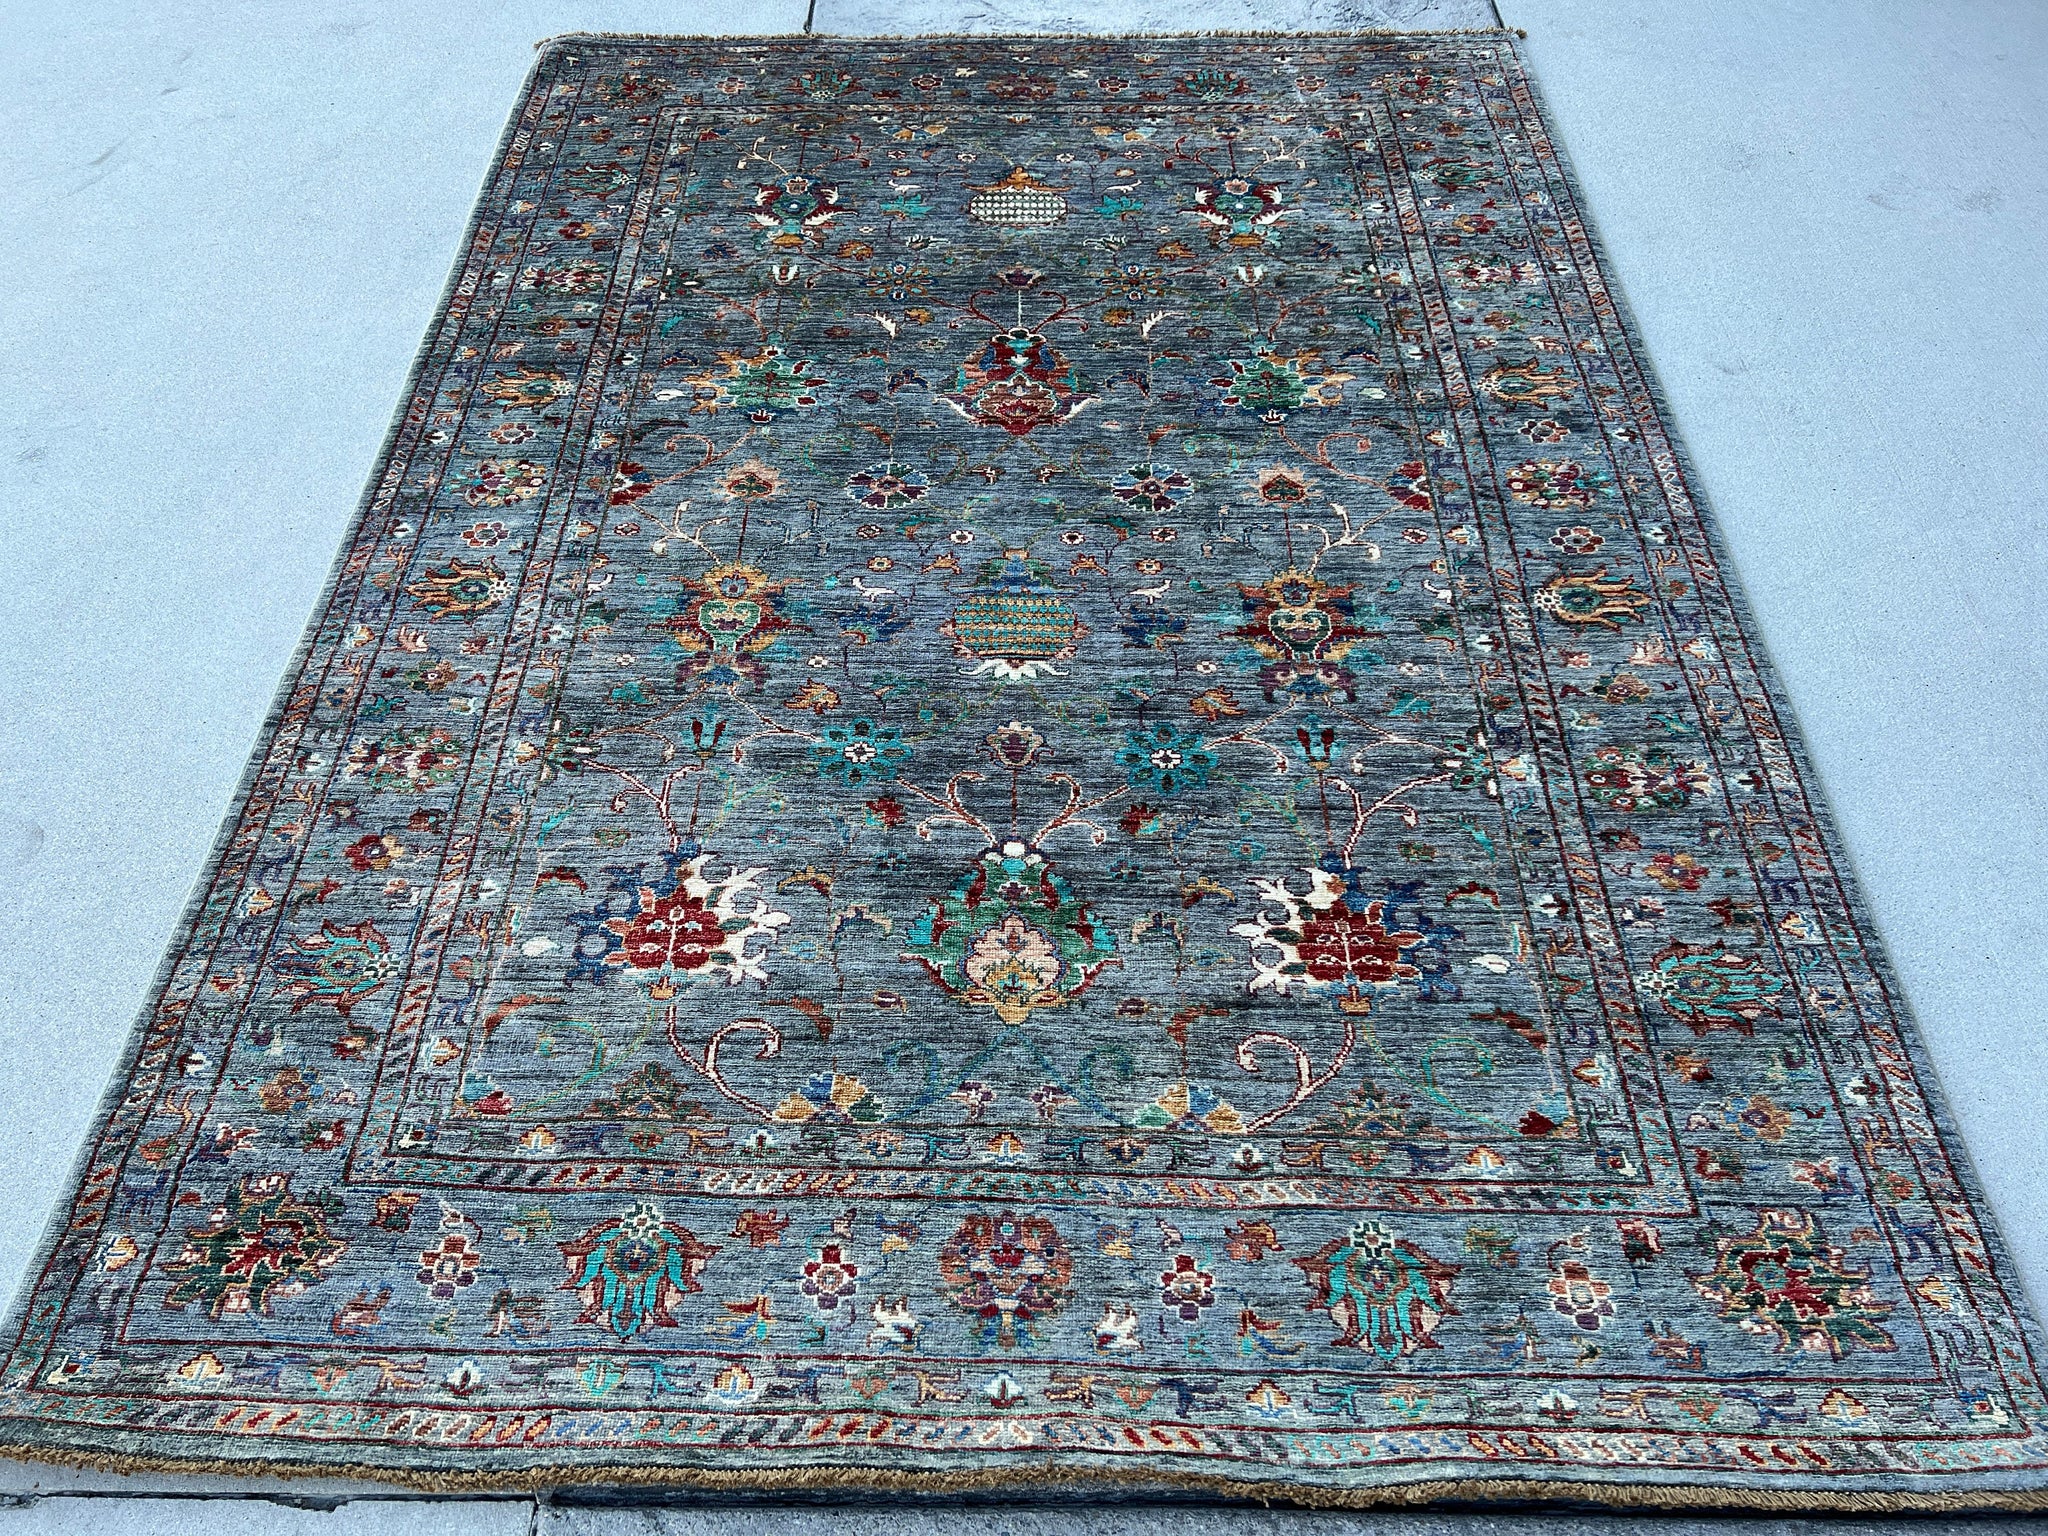 6x8 (180x245) Hand Knotted Afghan Rug | Muted Denim Blue Charcoal Grey Turquoise Green Red Moss Green Brown White Ivory Orange Blue | Floral